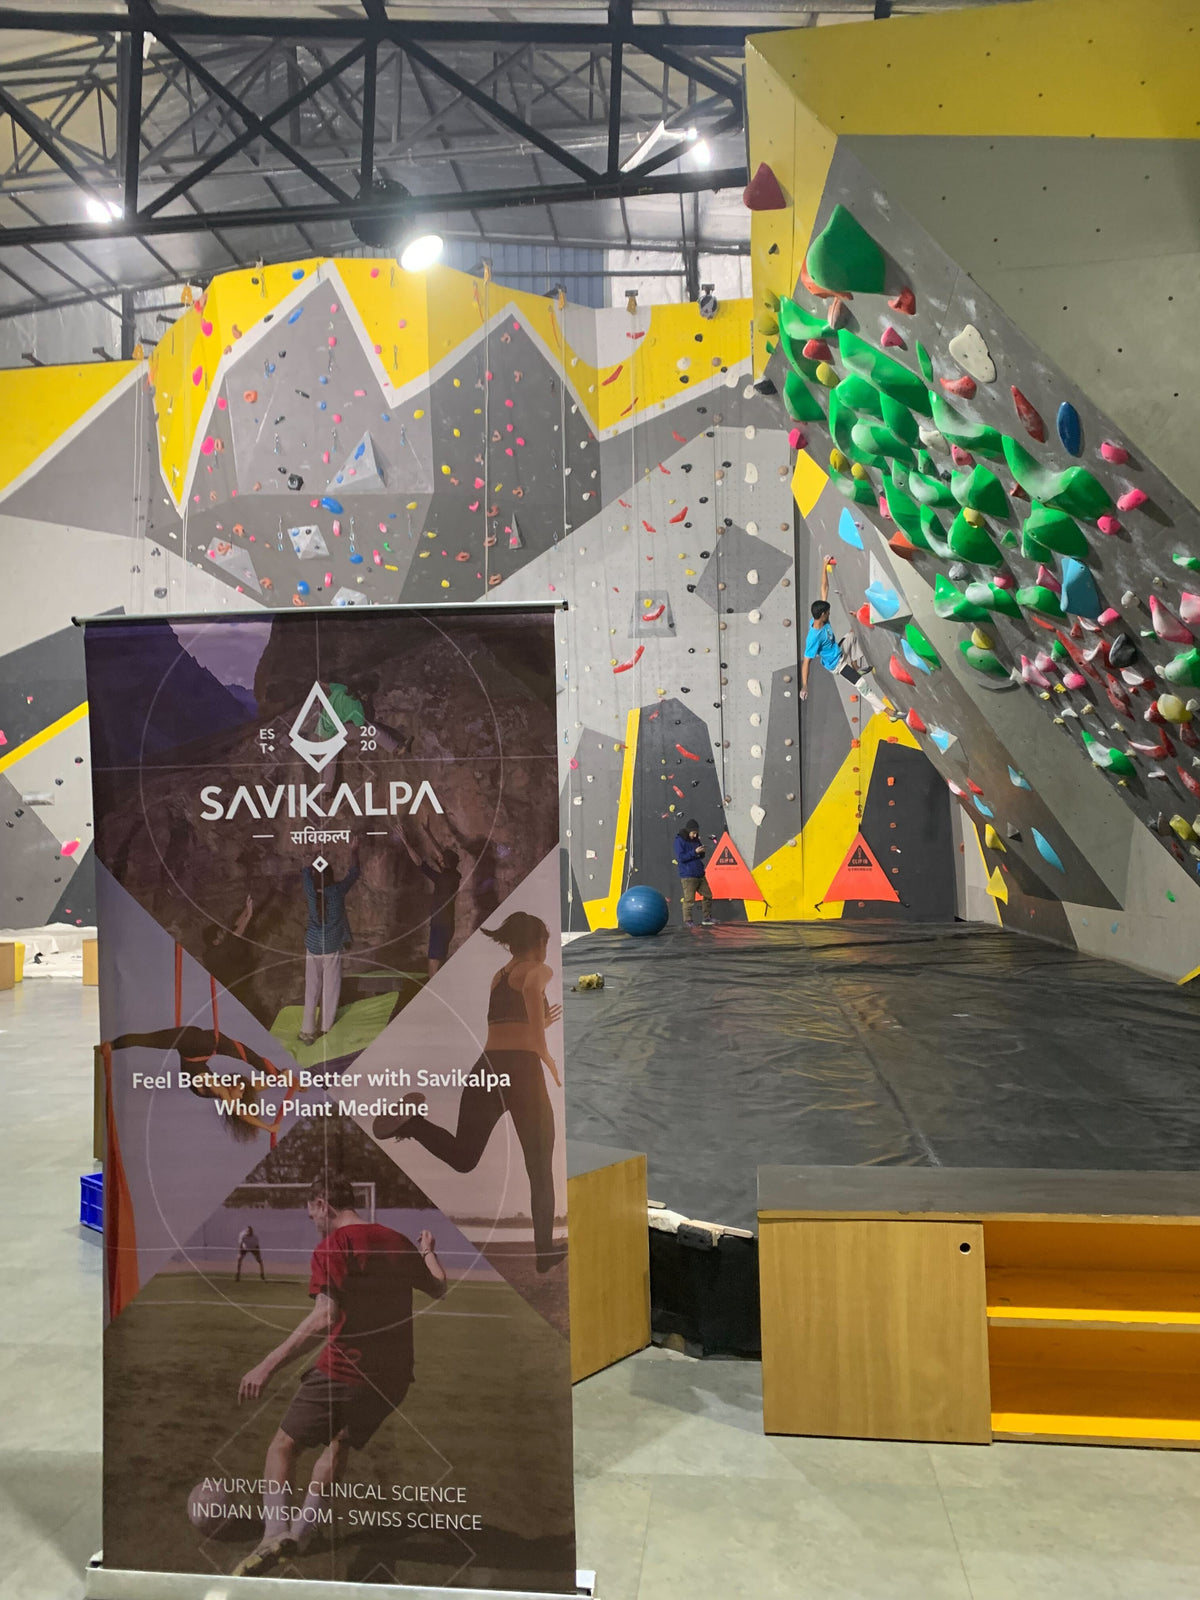 Climb city interior, featuring a promotional banner for Savikalpa focusing on wellness and plant-based medicine.